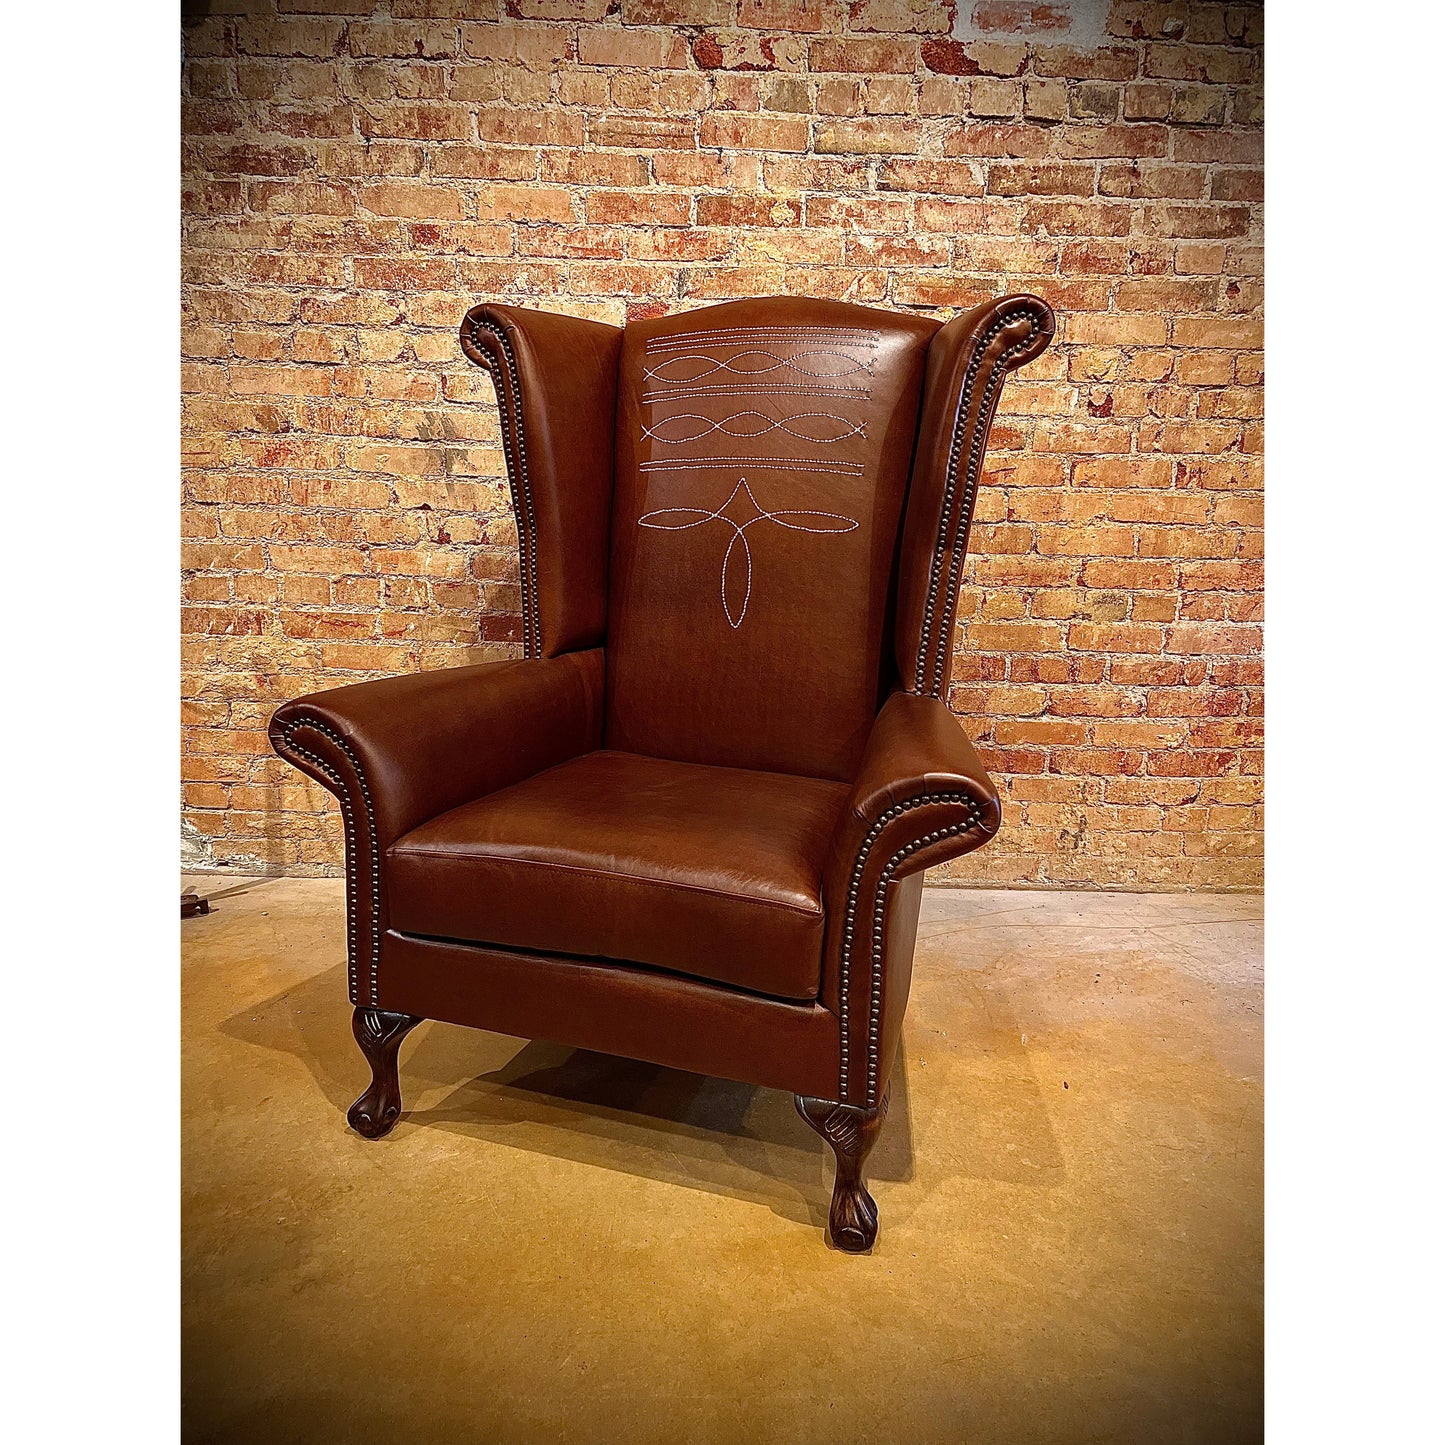 Step up your interior design game with the Stetson Wingback Chair. Crafted with a distinctive boot stitch and elegant wingback design, this chair exudes rustic charm. Elevate your space with a touch of sophistication and comfort.